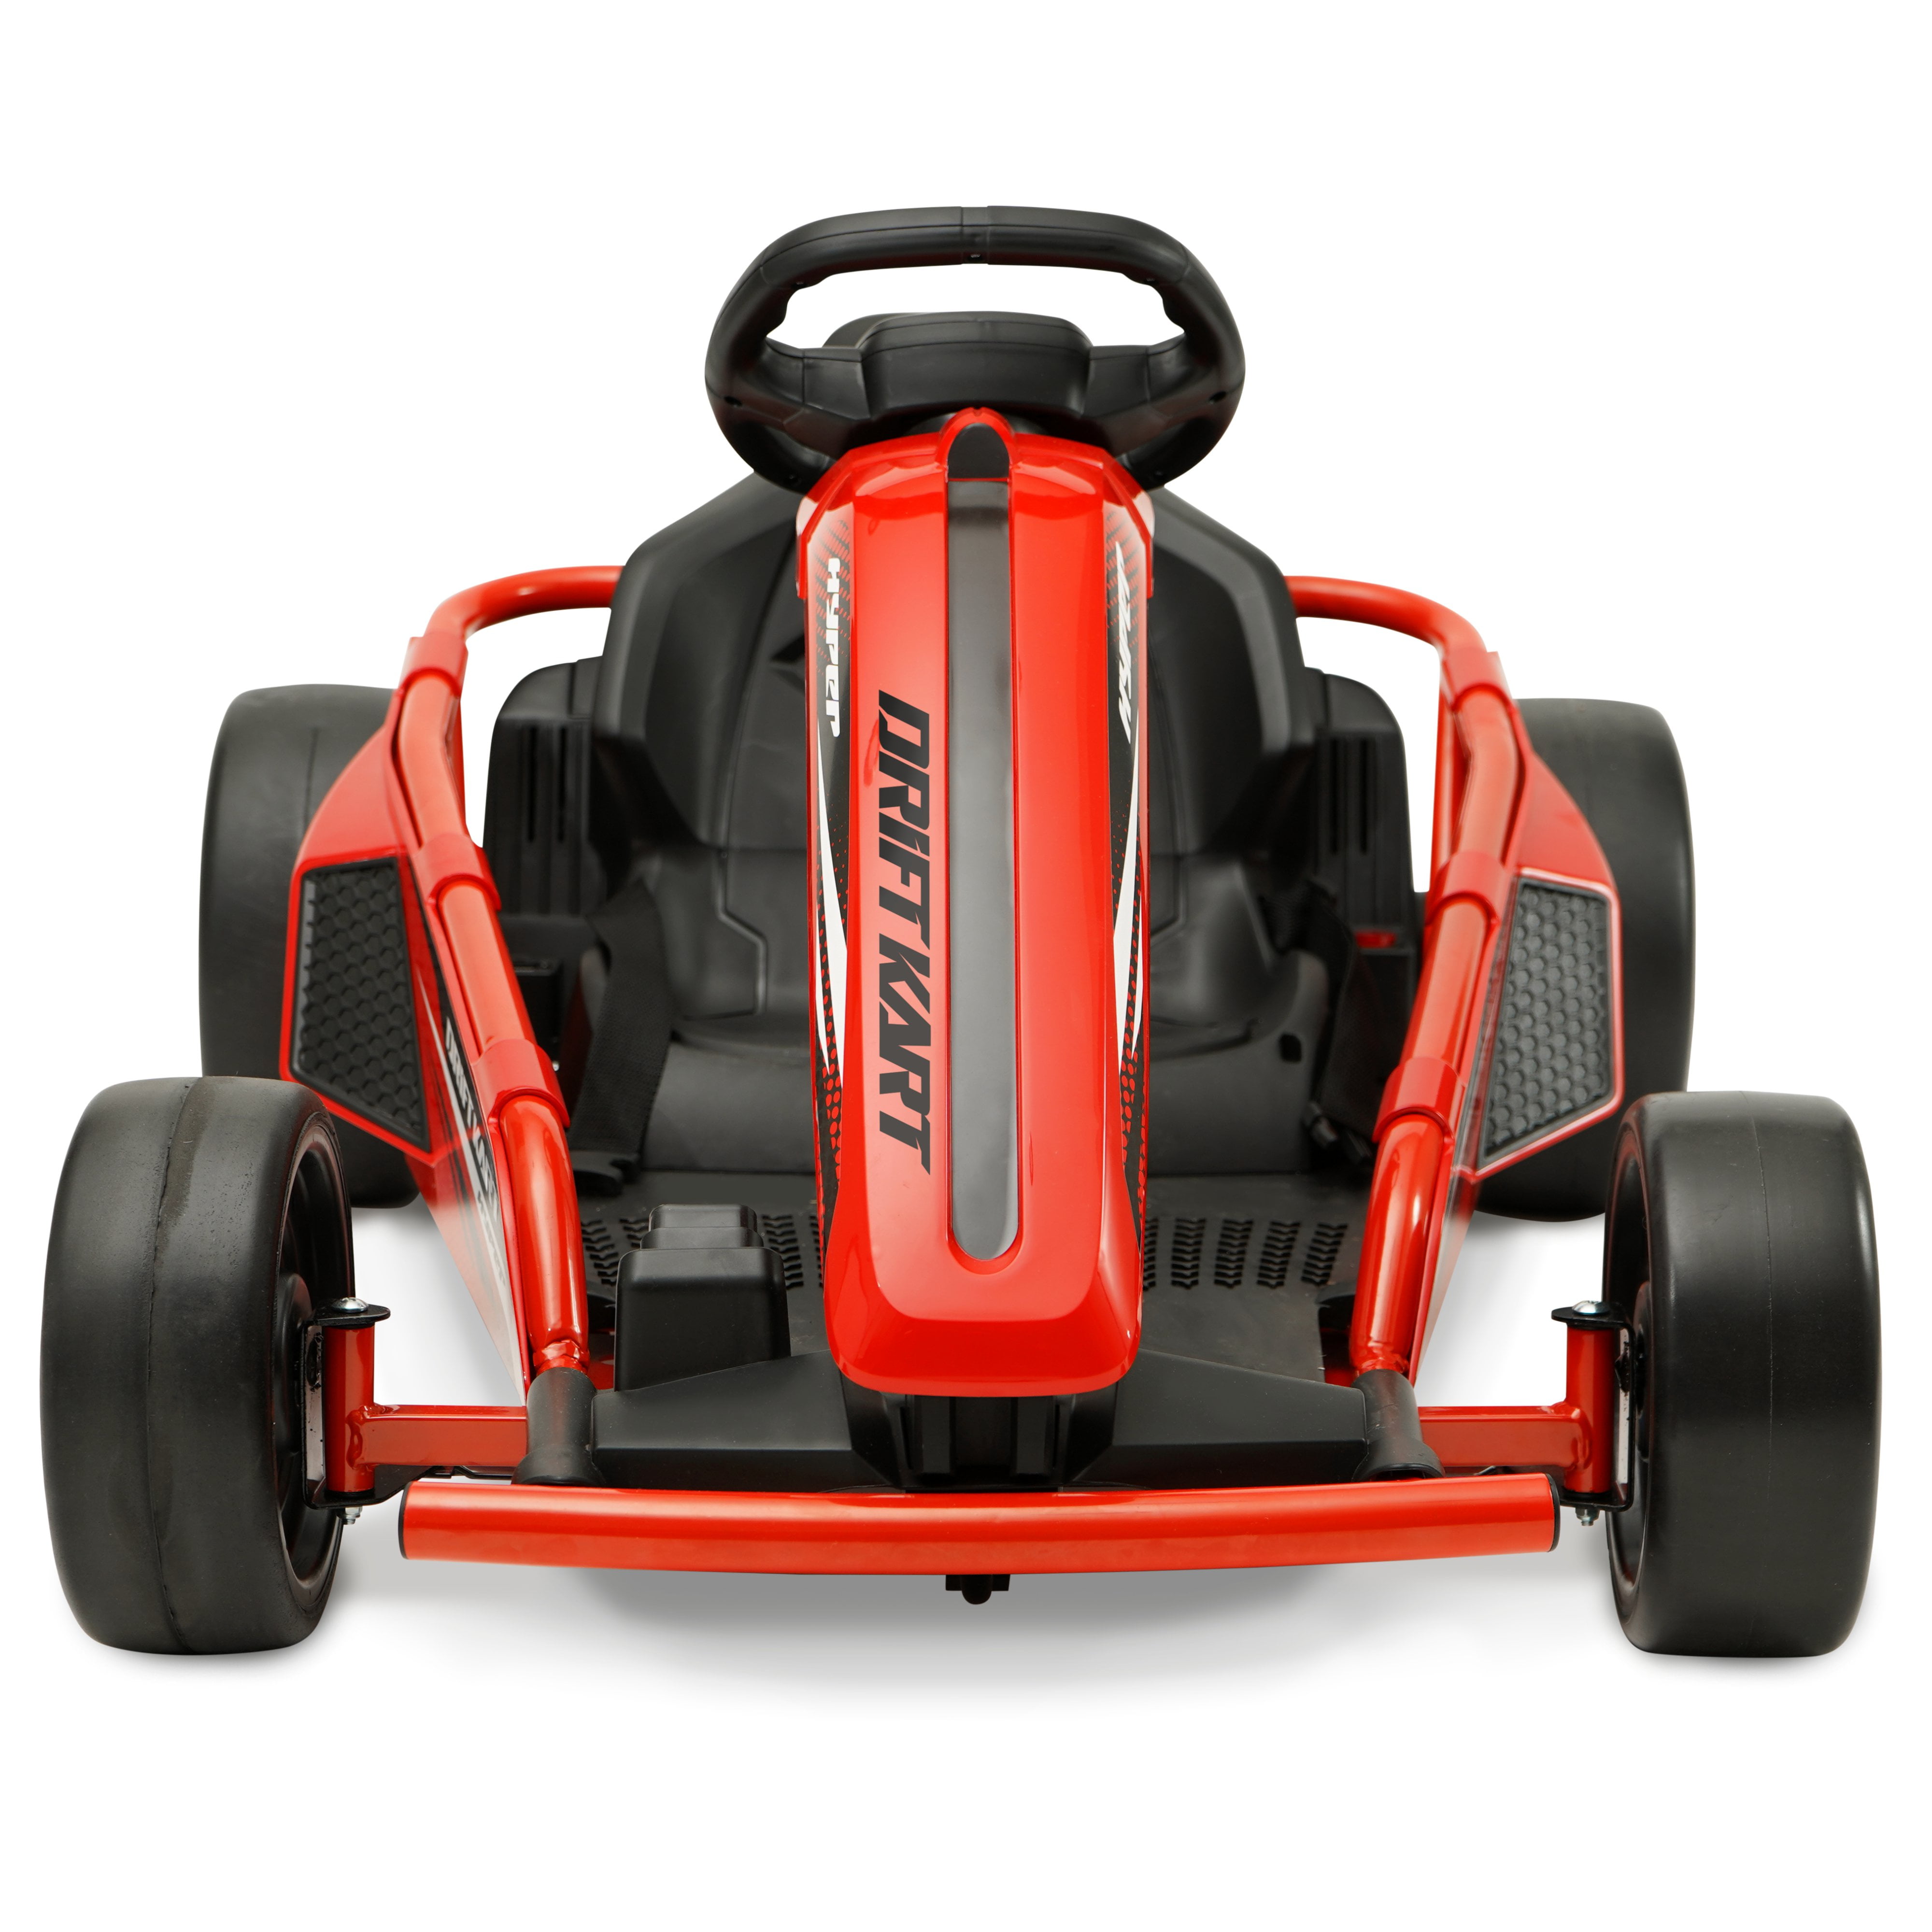 F1 Style Ultimate Power 24V Drift Ride On Go Kart  Car Tots Remote Control  Ride On Cars, Trucks, SUVs and jeeps